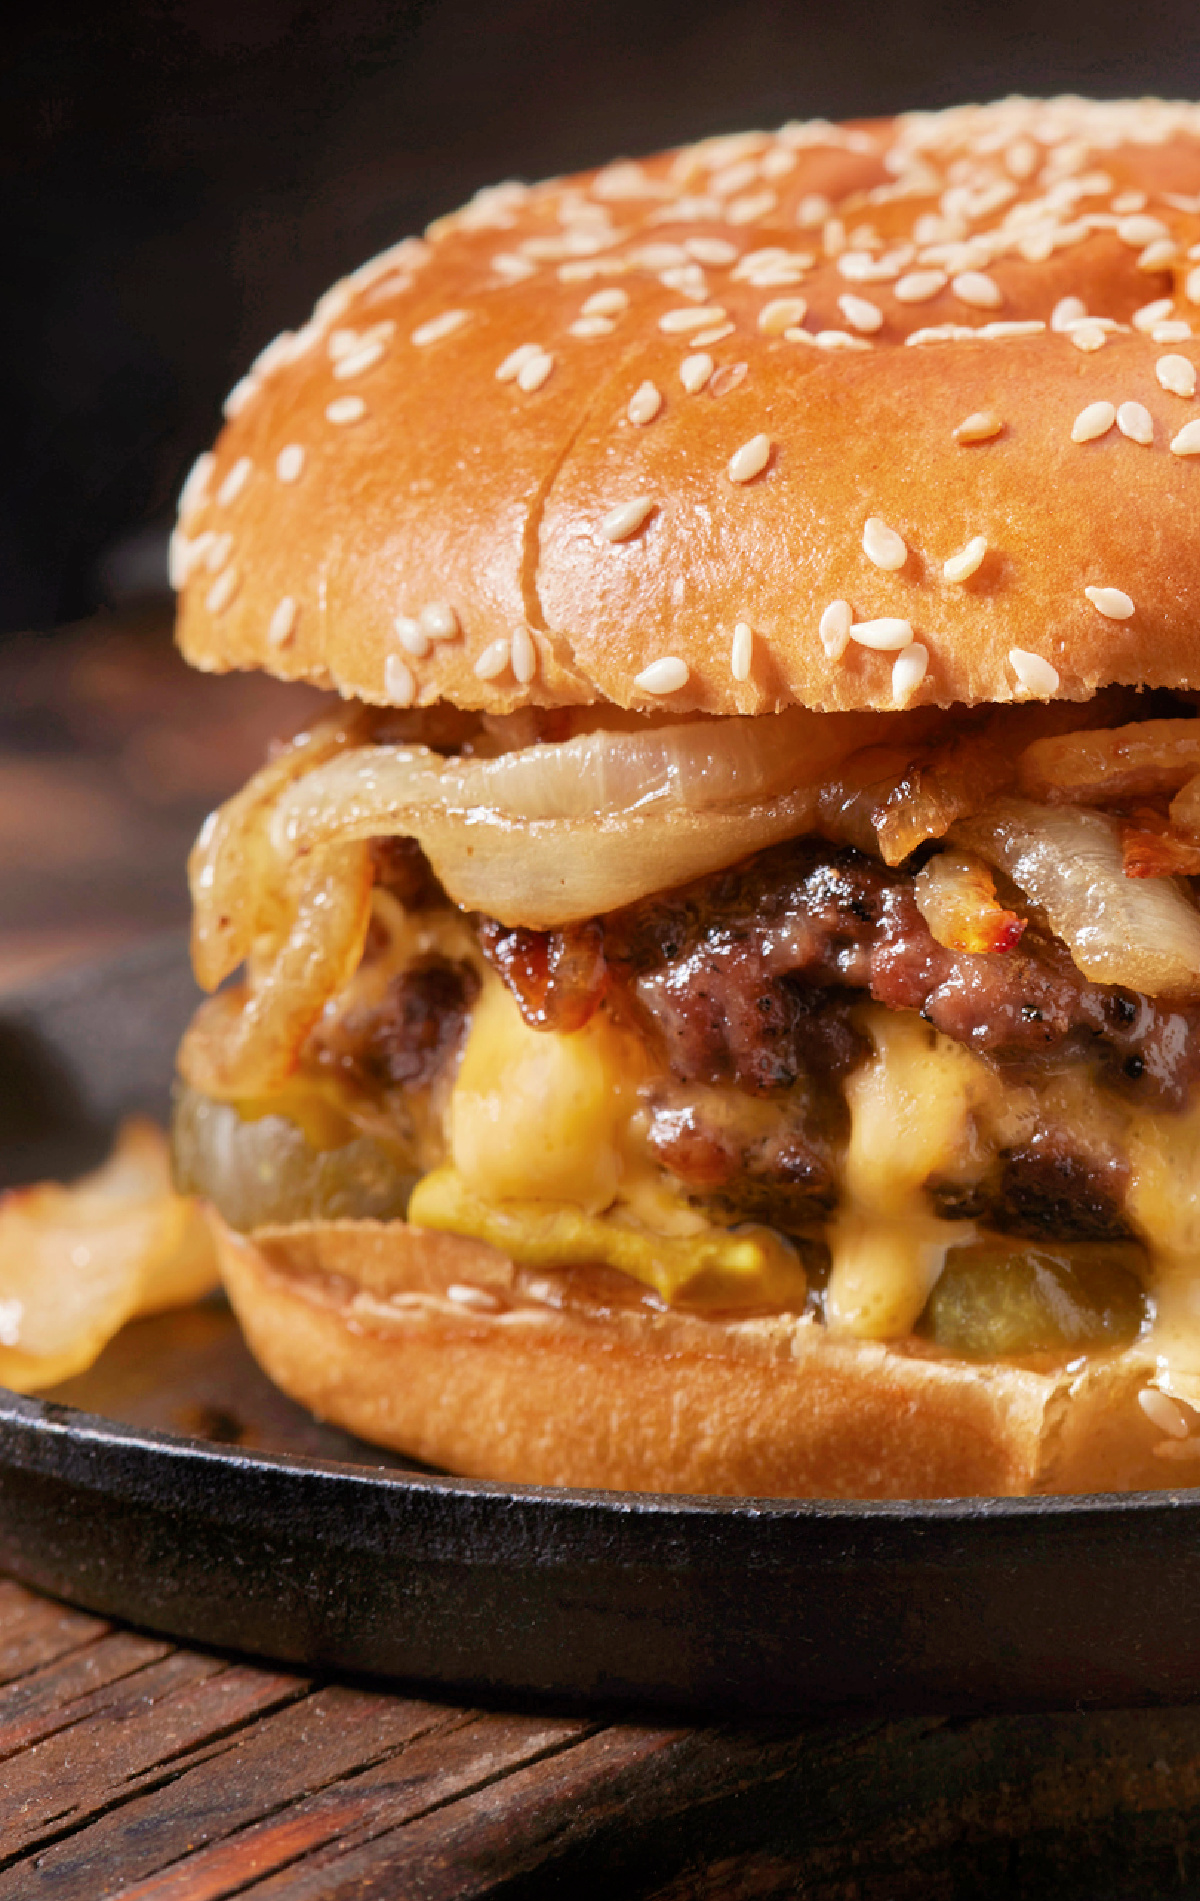 The ultimate juicy smash burger with fried onions on a sesame seed bun